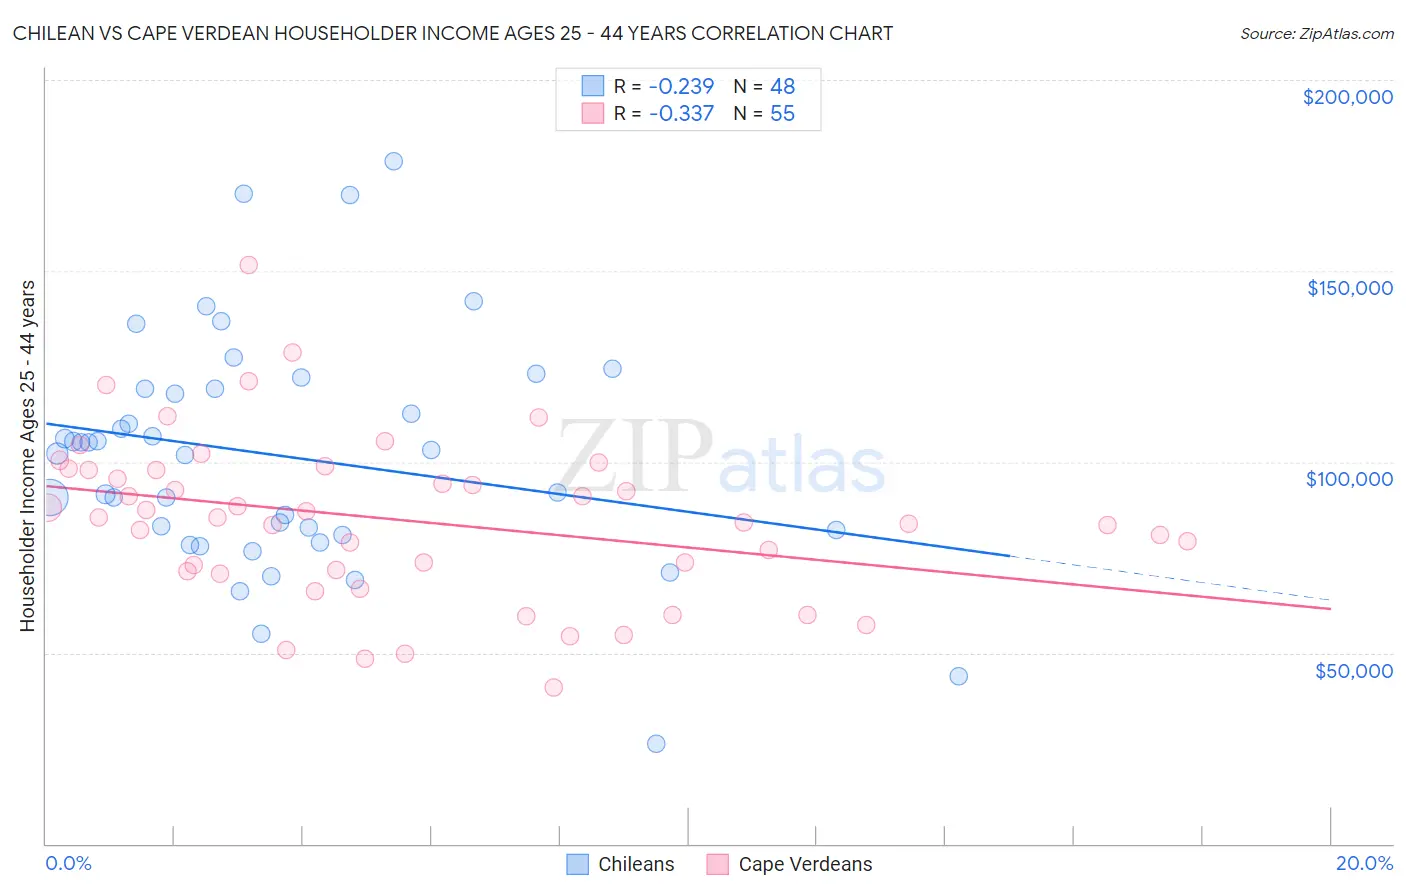 Chilean vs Cape Verdean Householder Income Ages 25 - 44 years